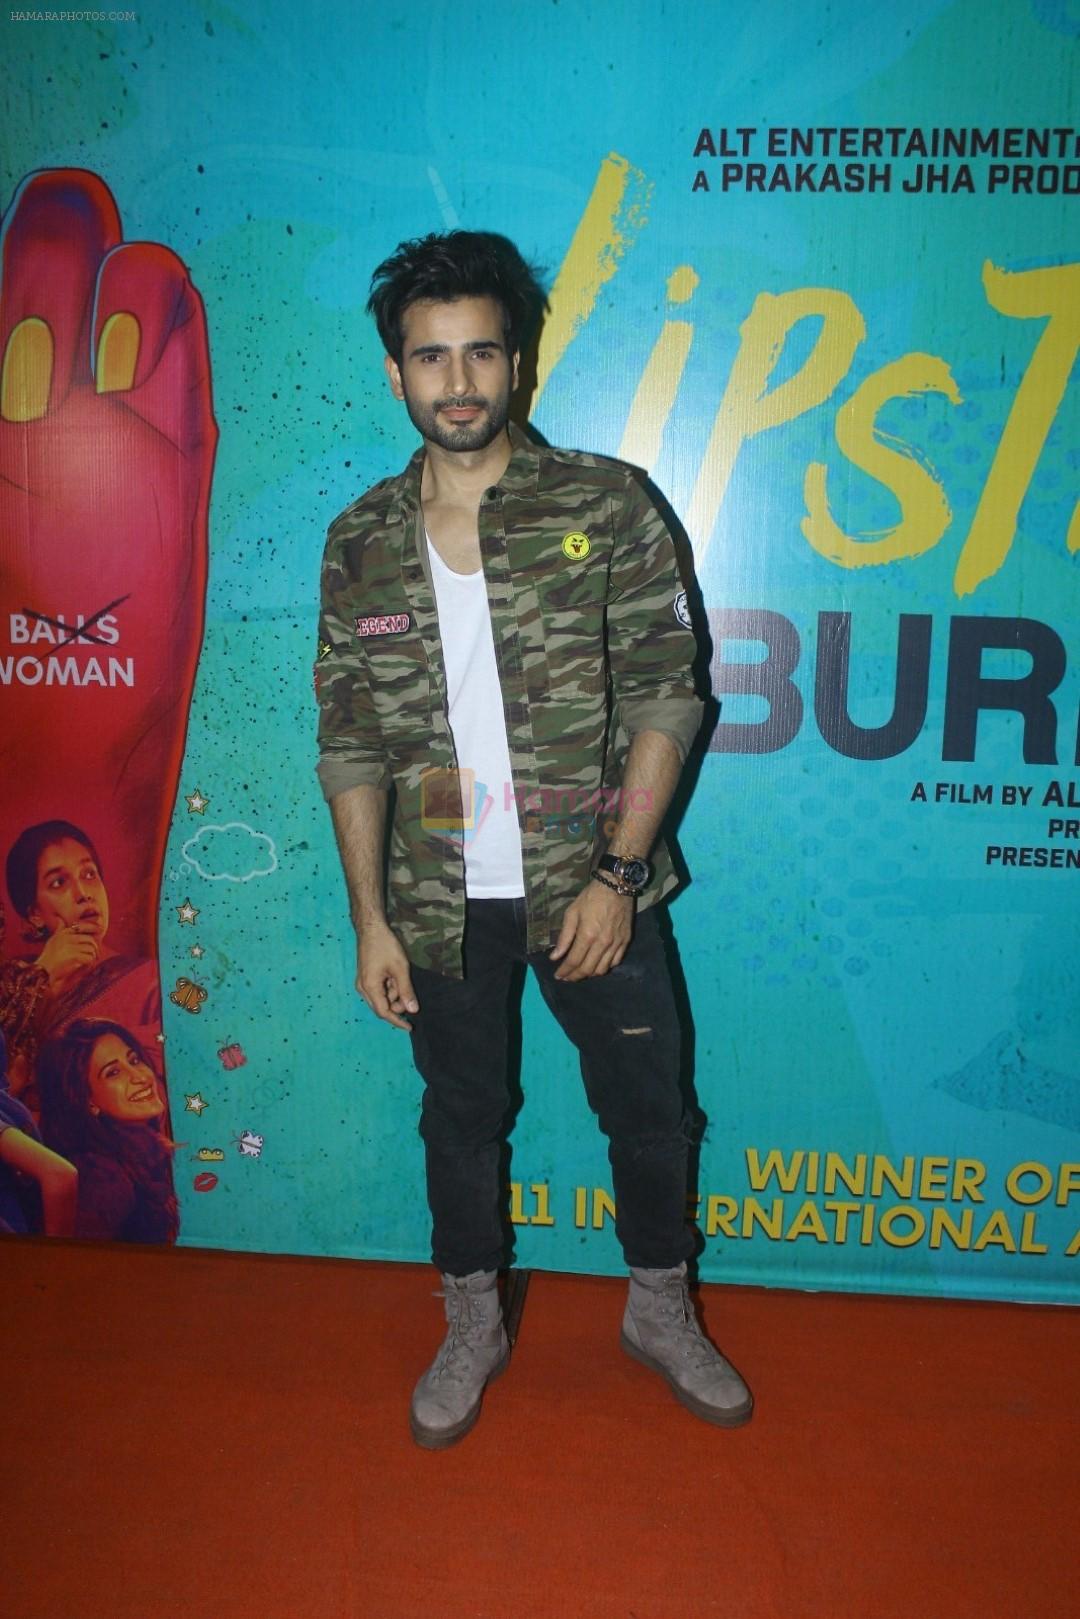 Karan Tacker at the The Red Carpet along With Success Party Of Film Lipstick Under My Burkha on 28th July 2017